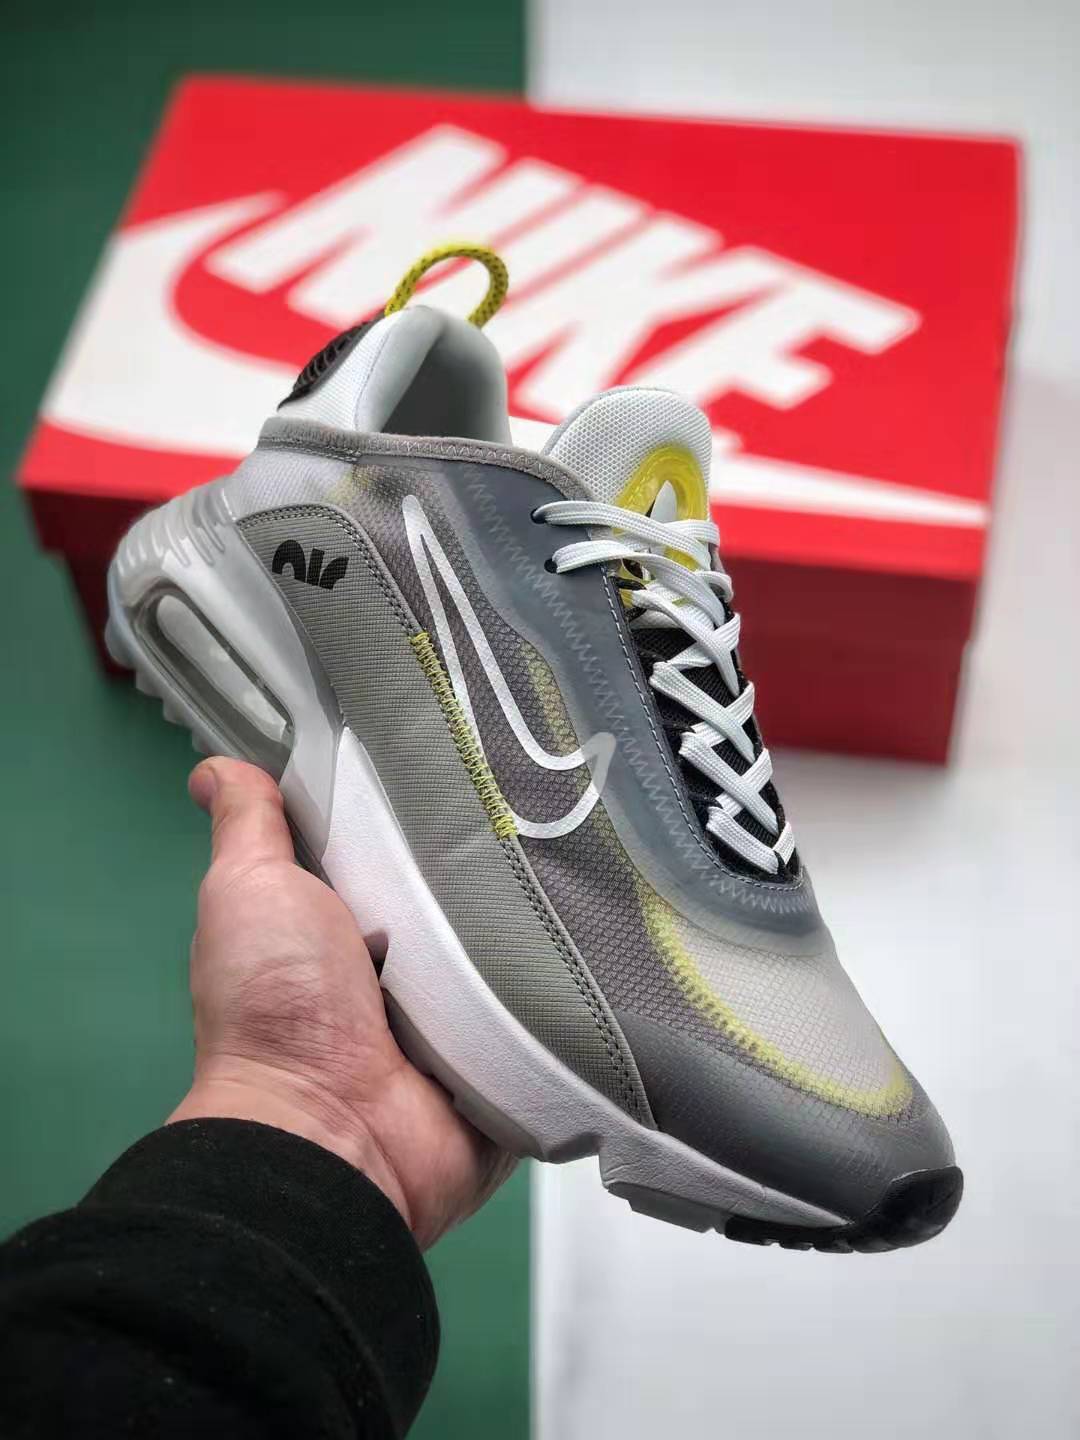 Nike Air Max 2090 Light Grey White Khaki Multi-Color CQ7630-010 - Stylish and Comfortable Sneakers for Men